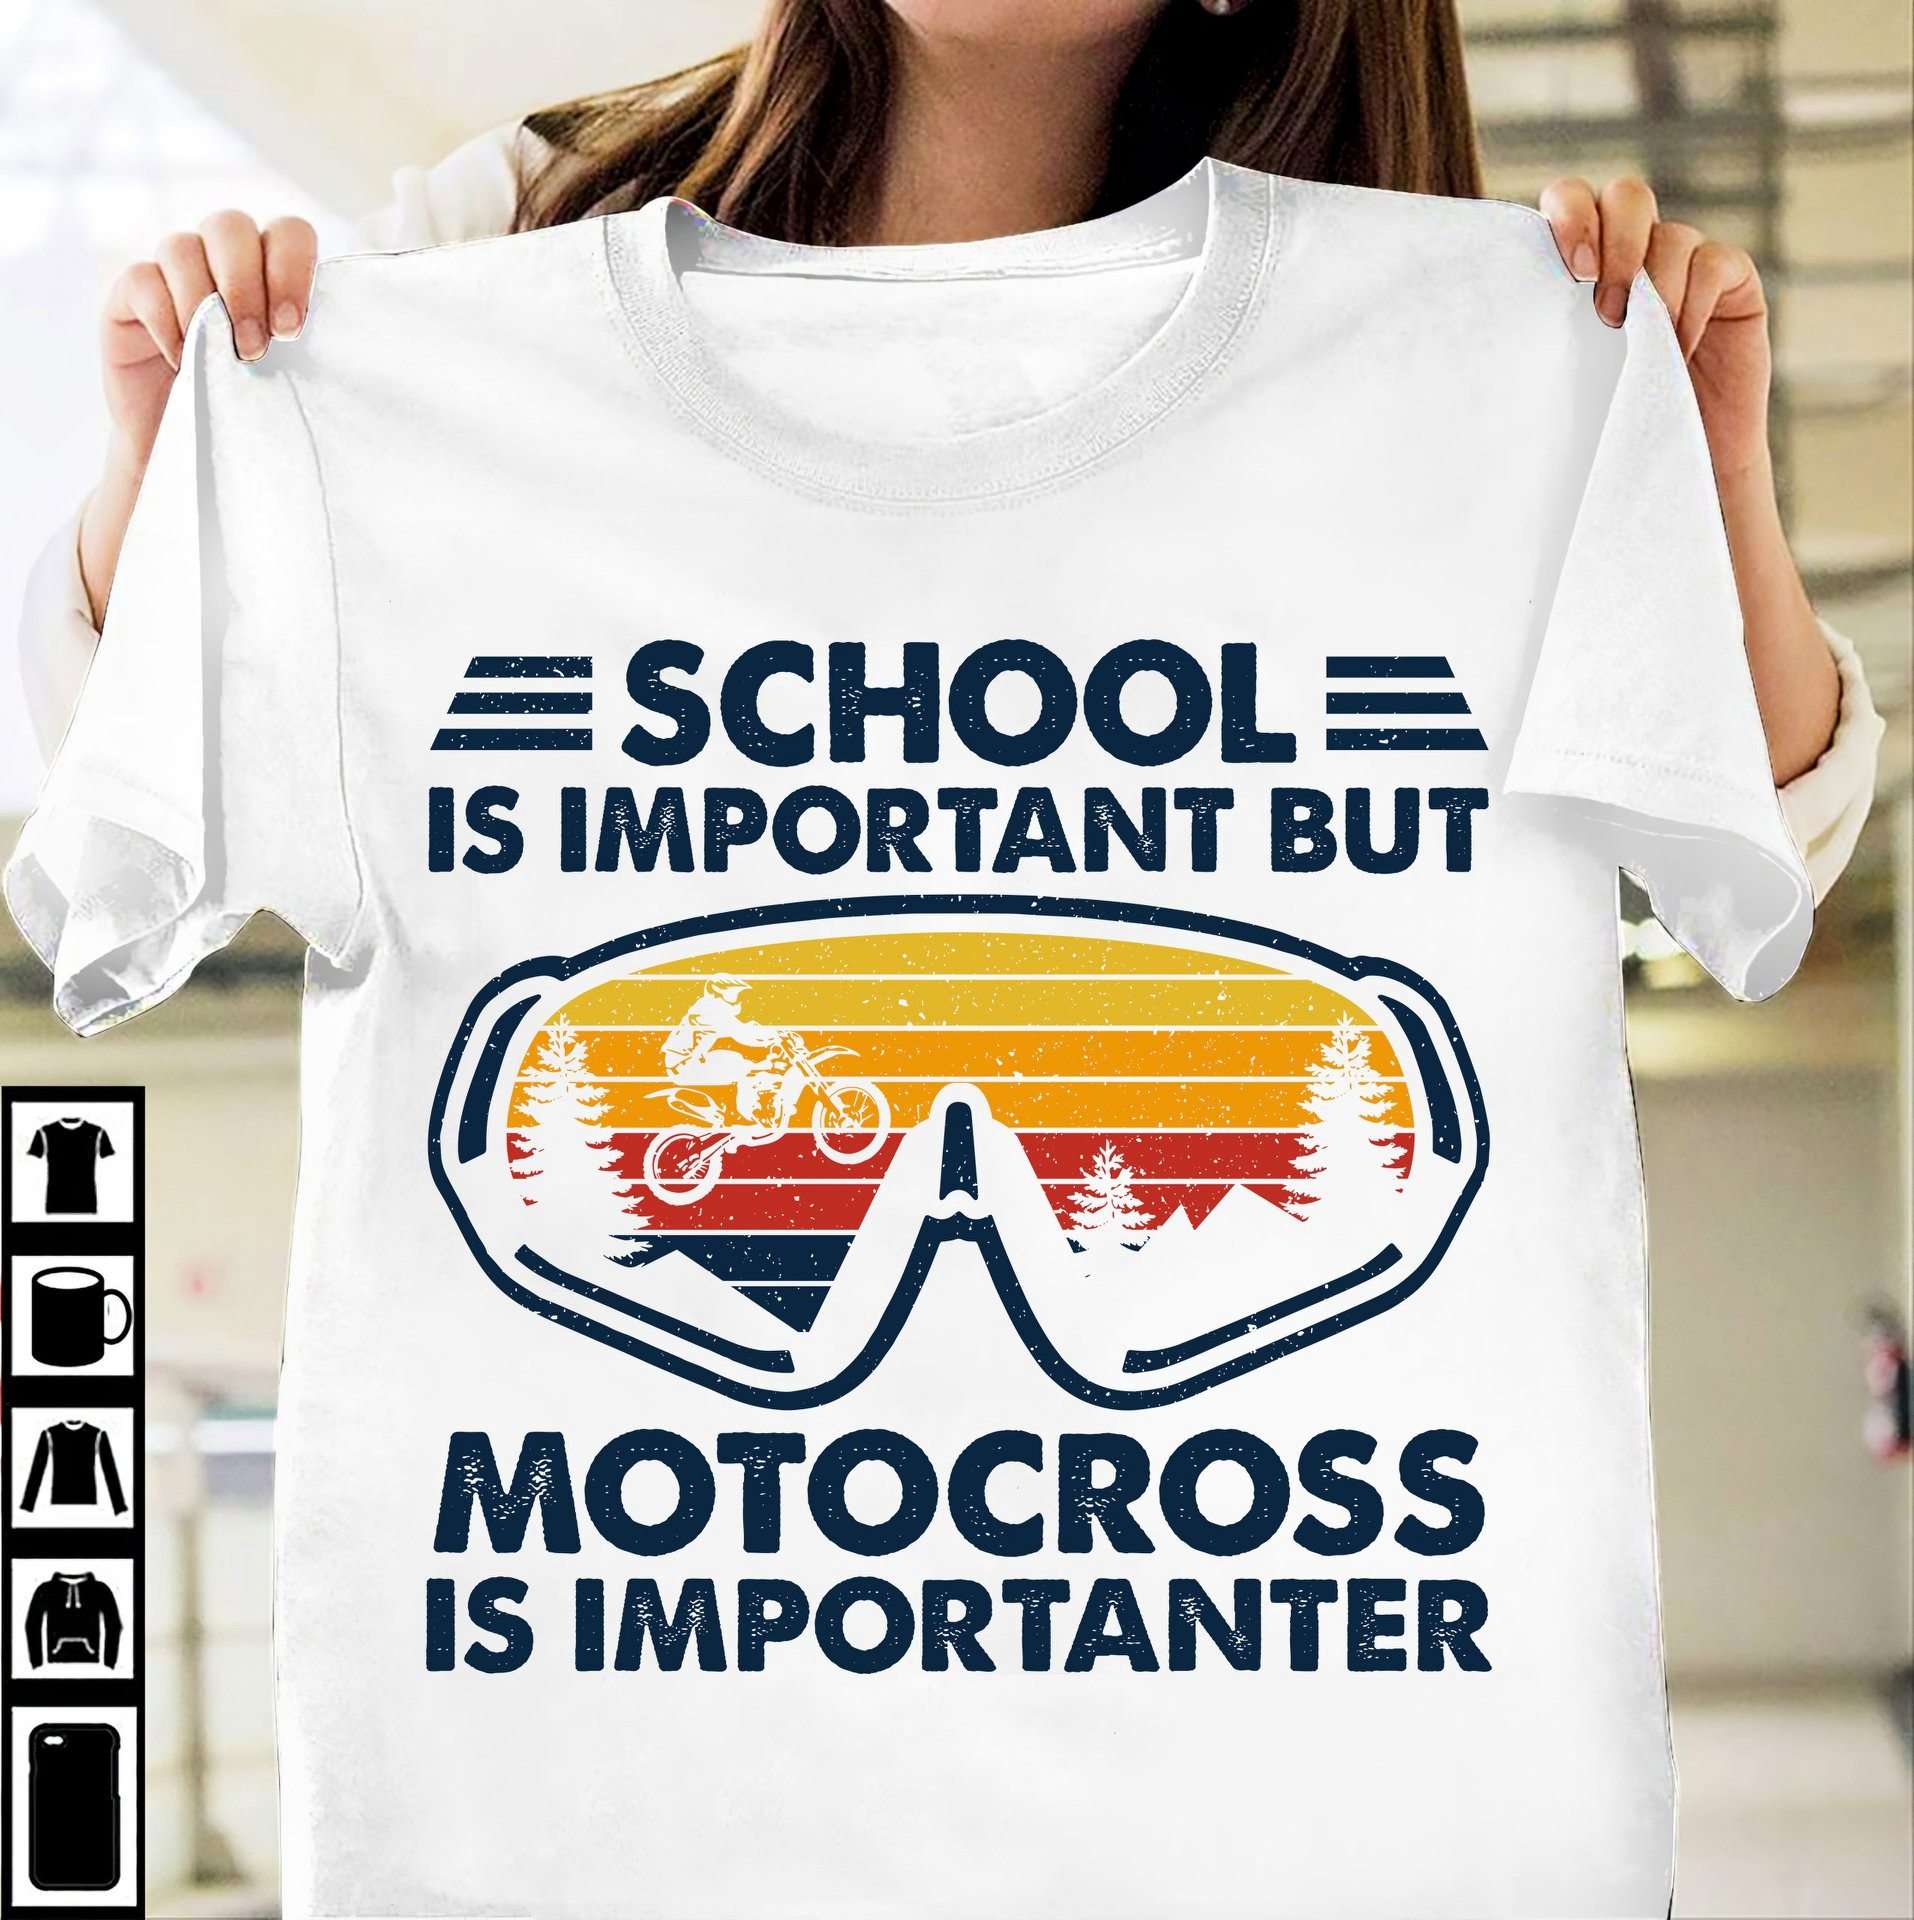 School is important but motocross is importanter - Motorcross the sport, gift for motor rider